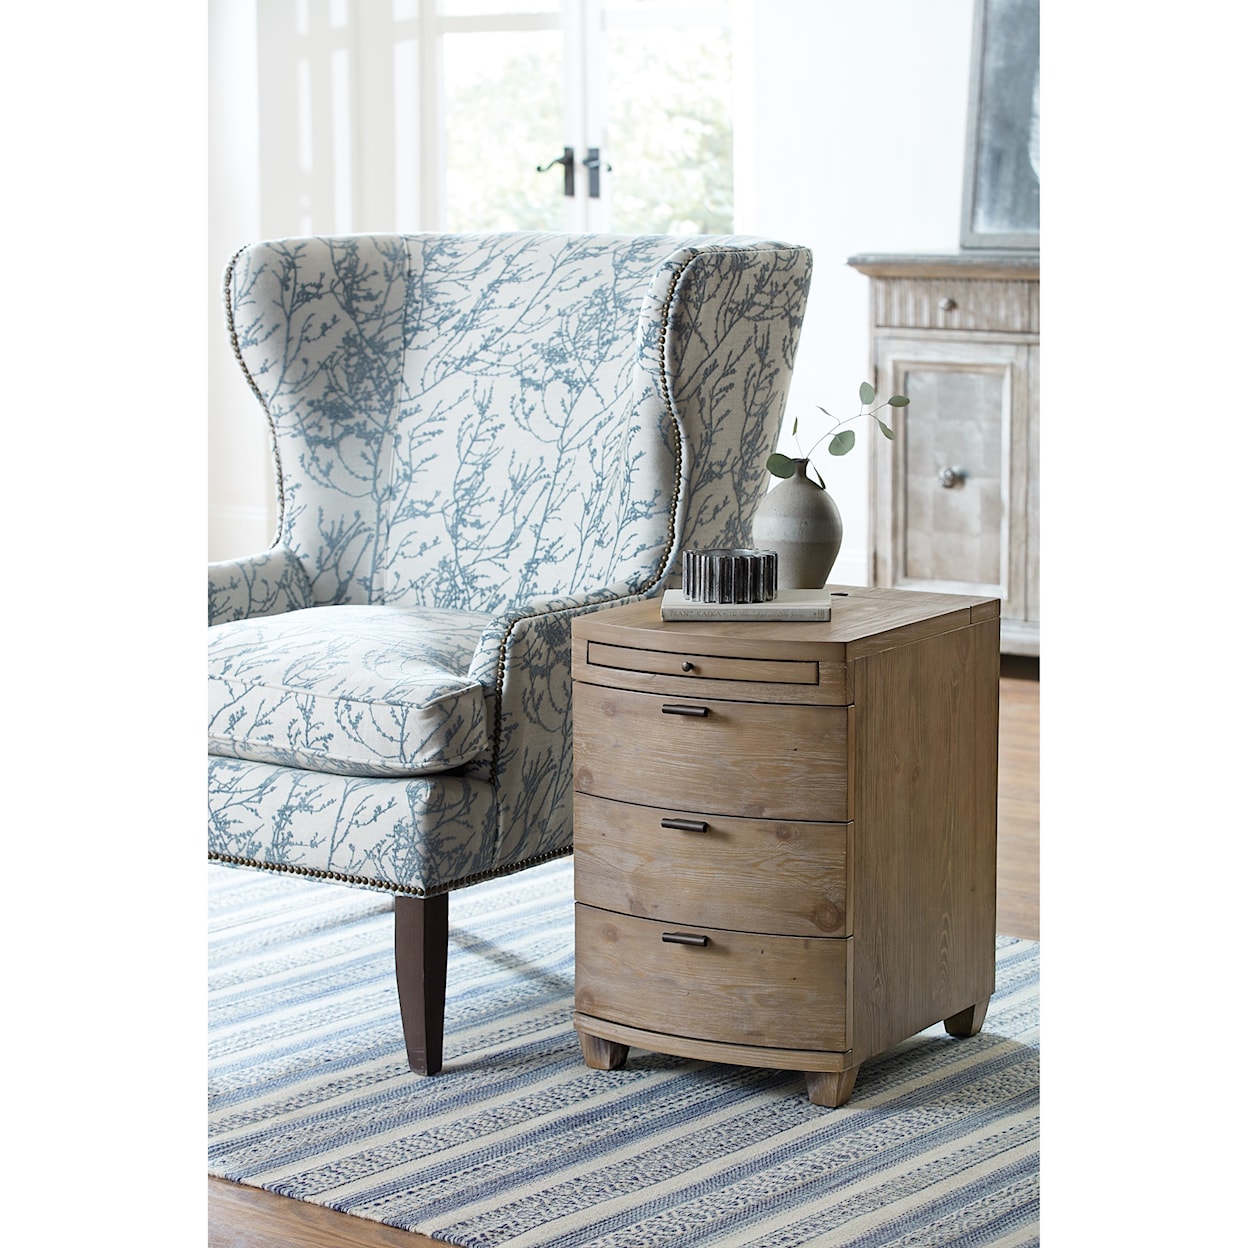 Hammary Chairsides Driftwood Bowfront Chairside